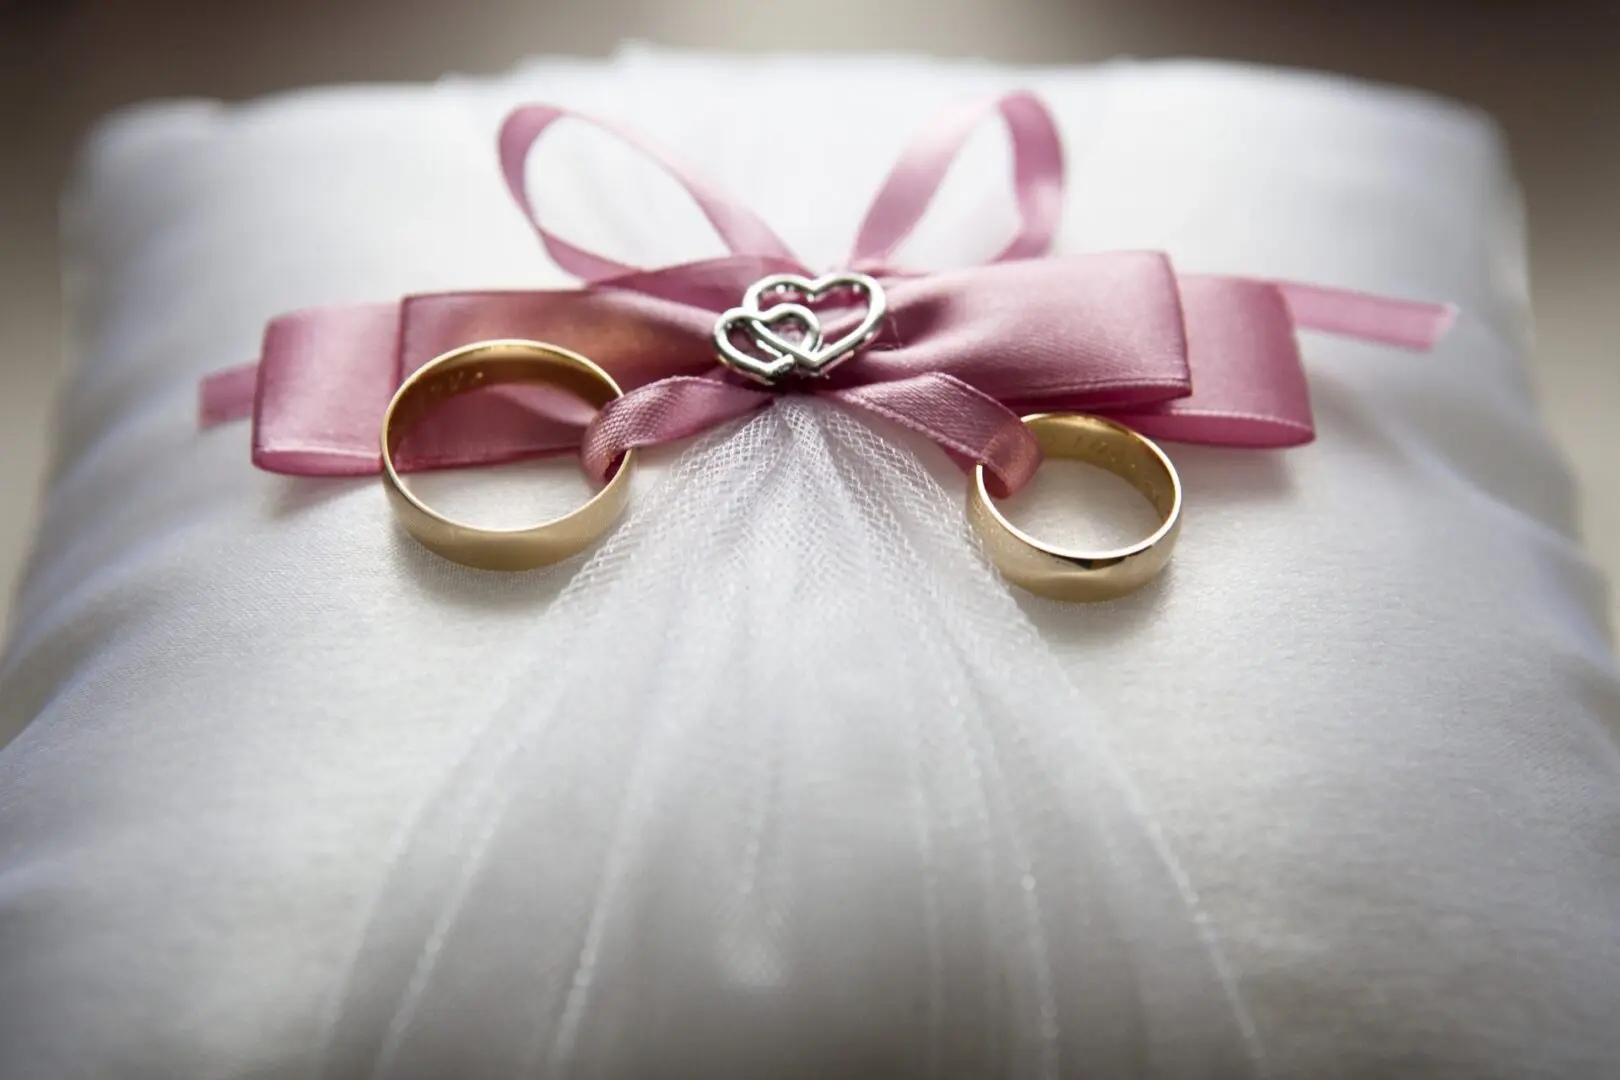 Two wedding rings sitting on top of a white pillow.